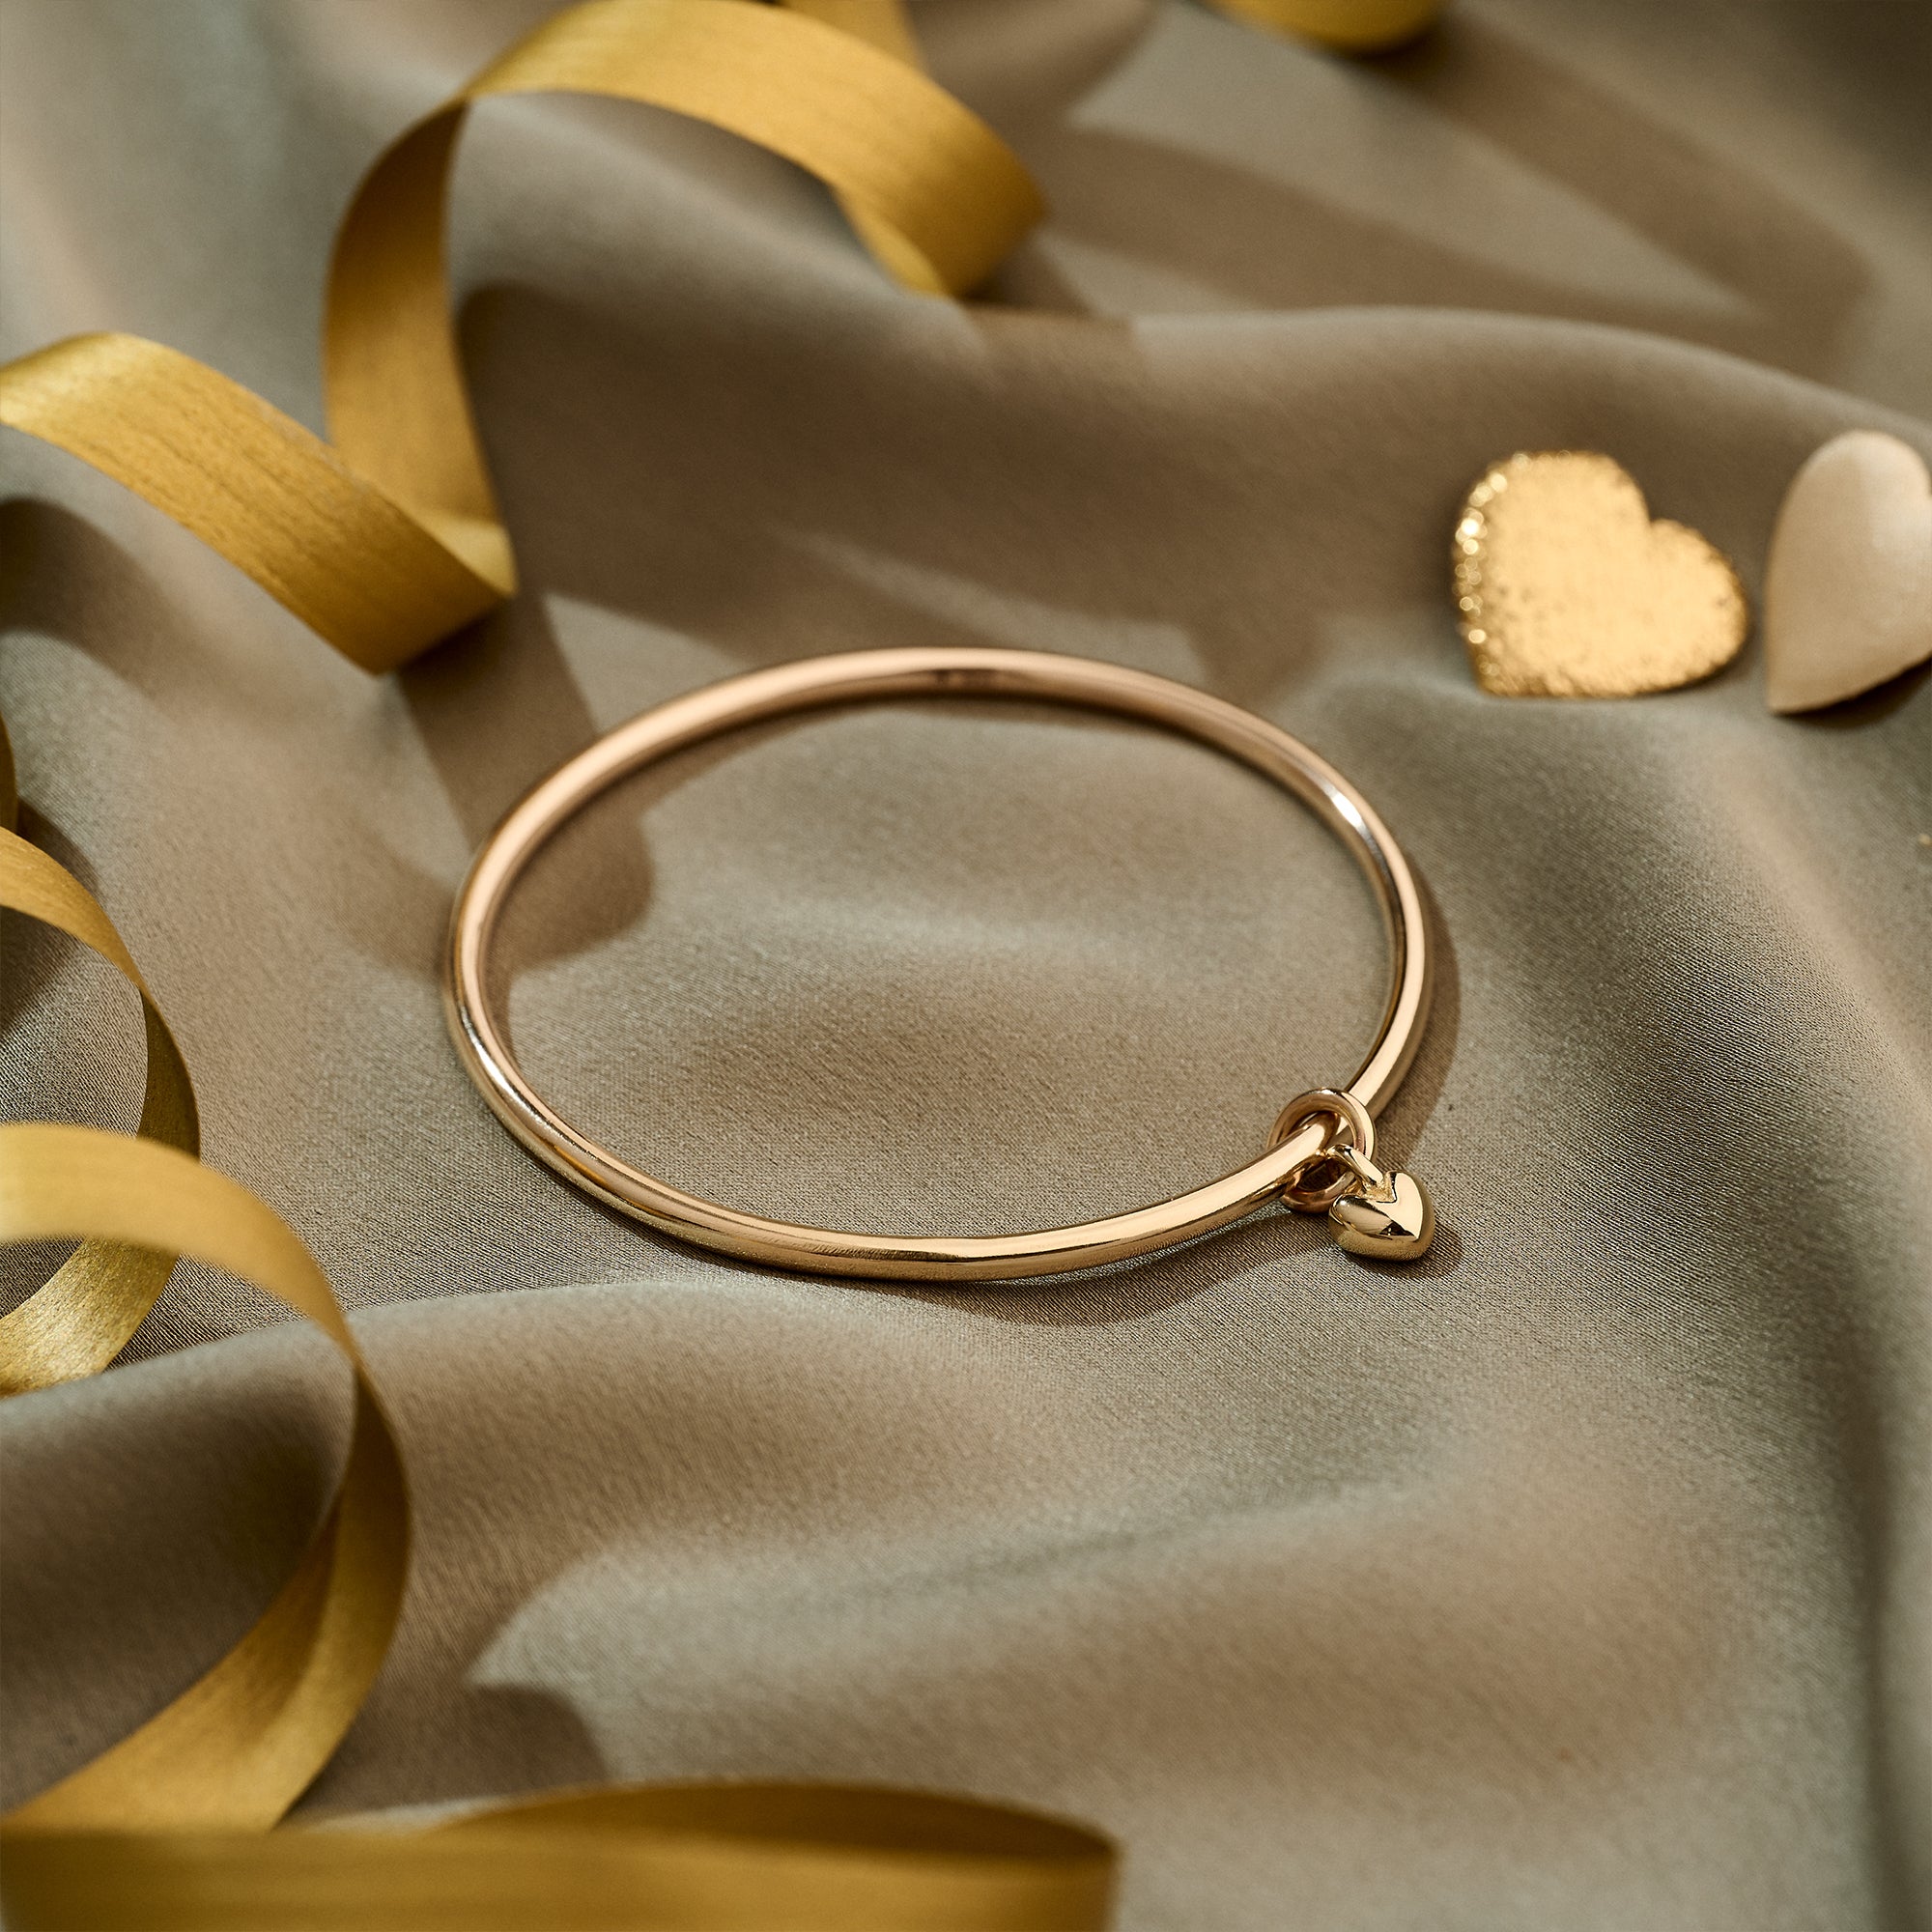 solid 9k recycled gold heart charm bangle bracelet